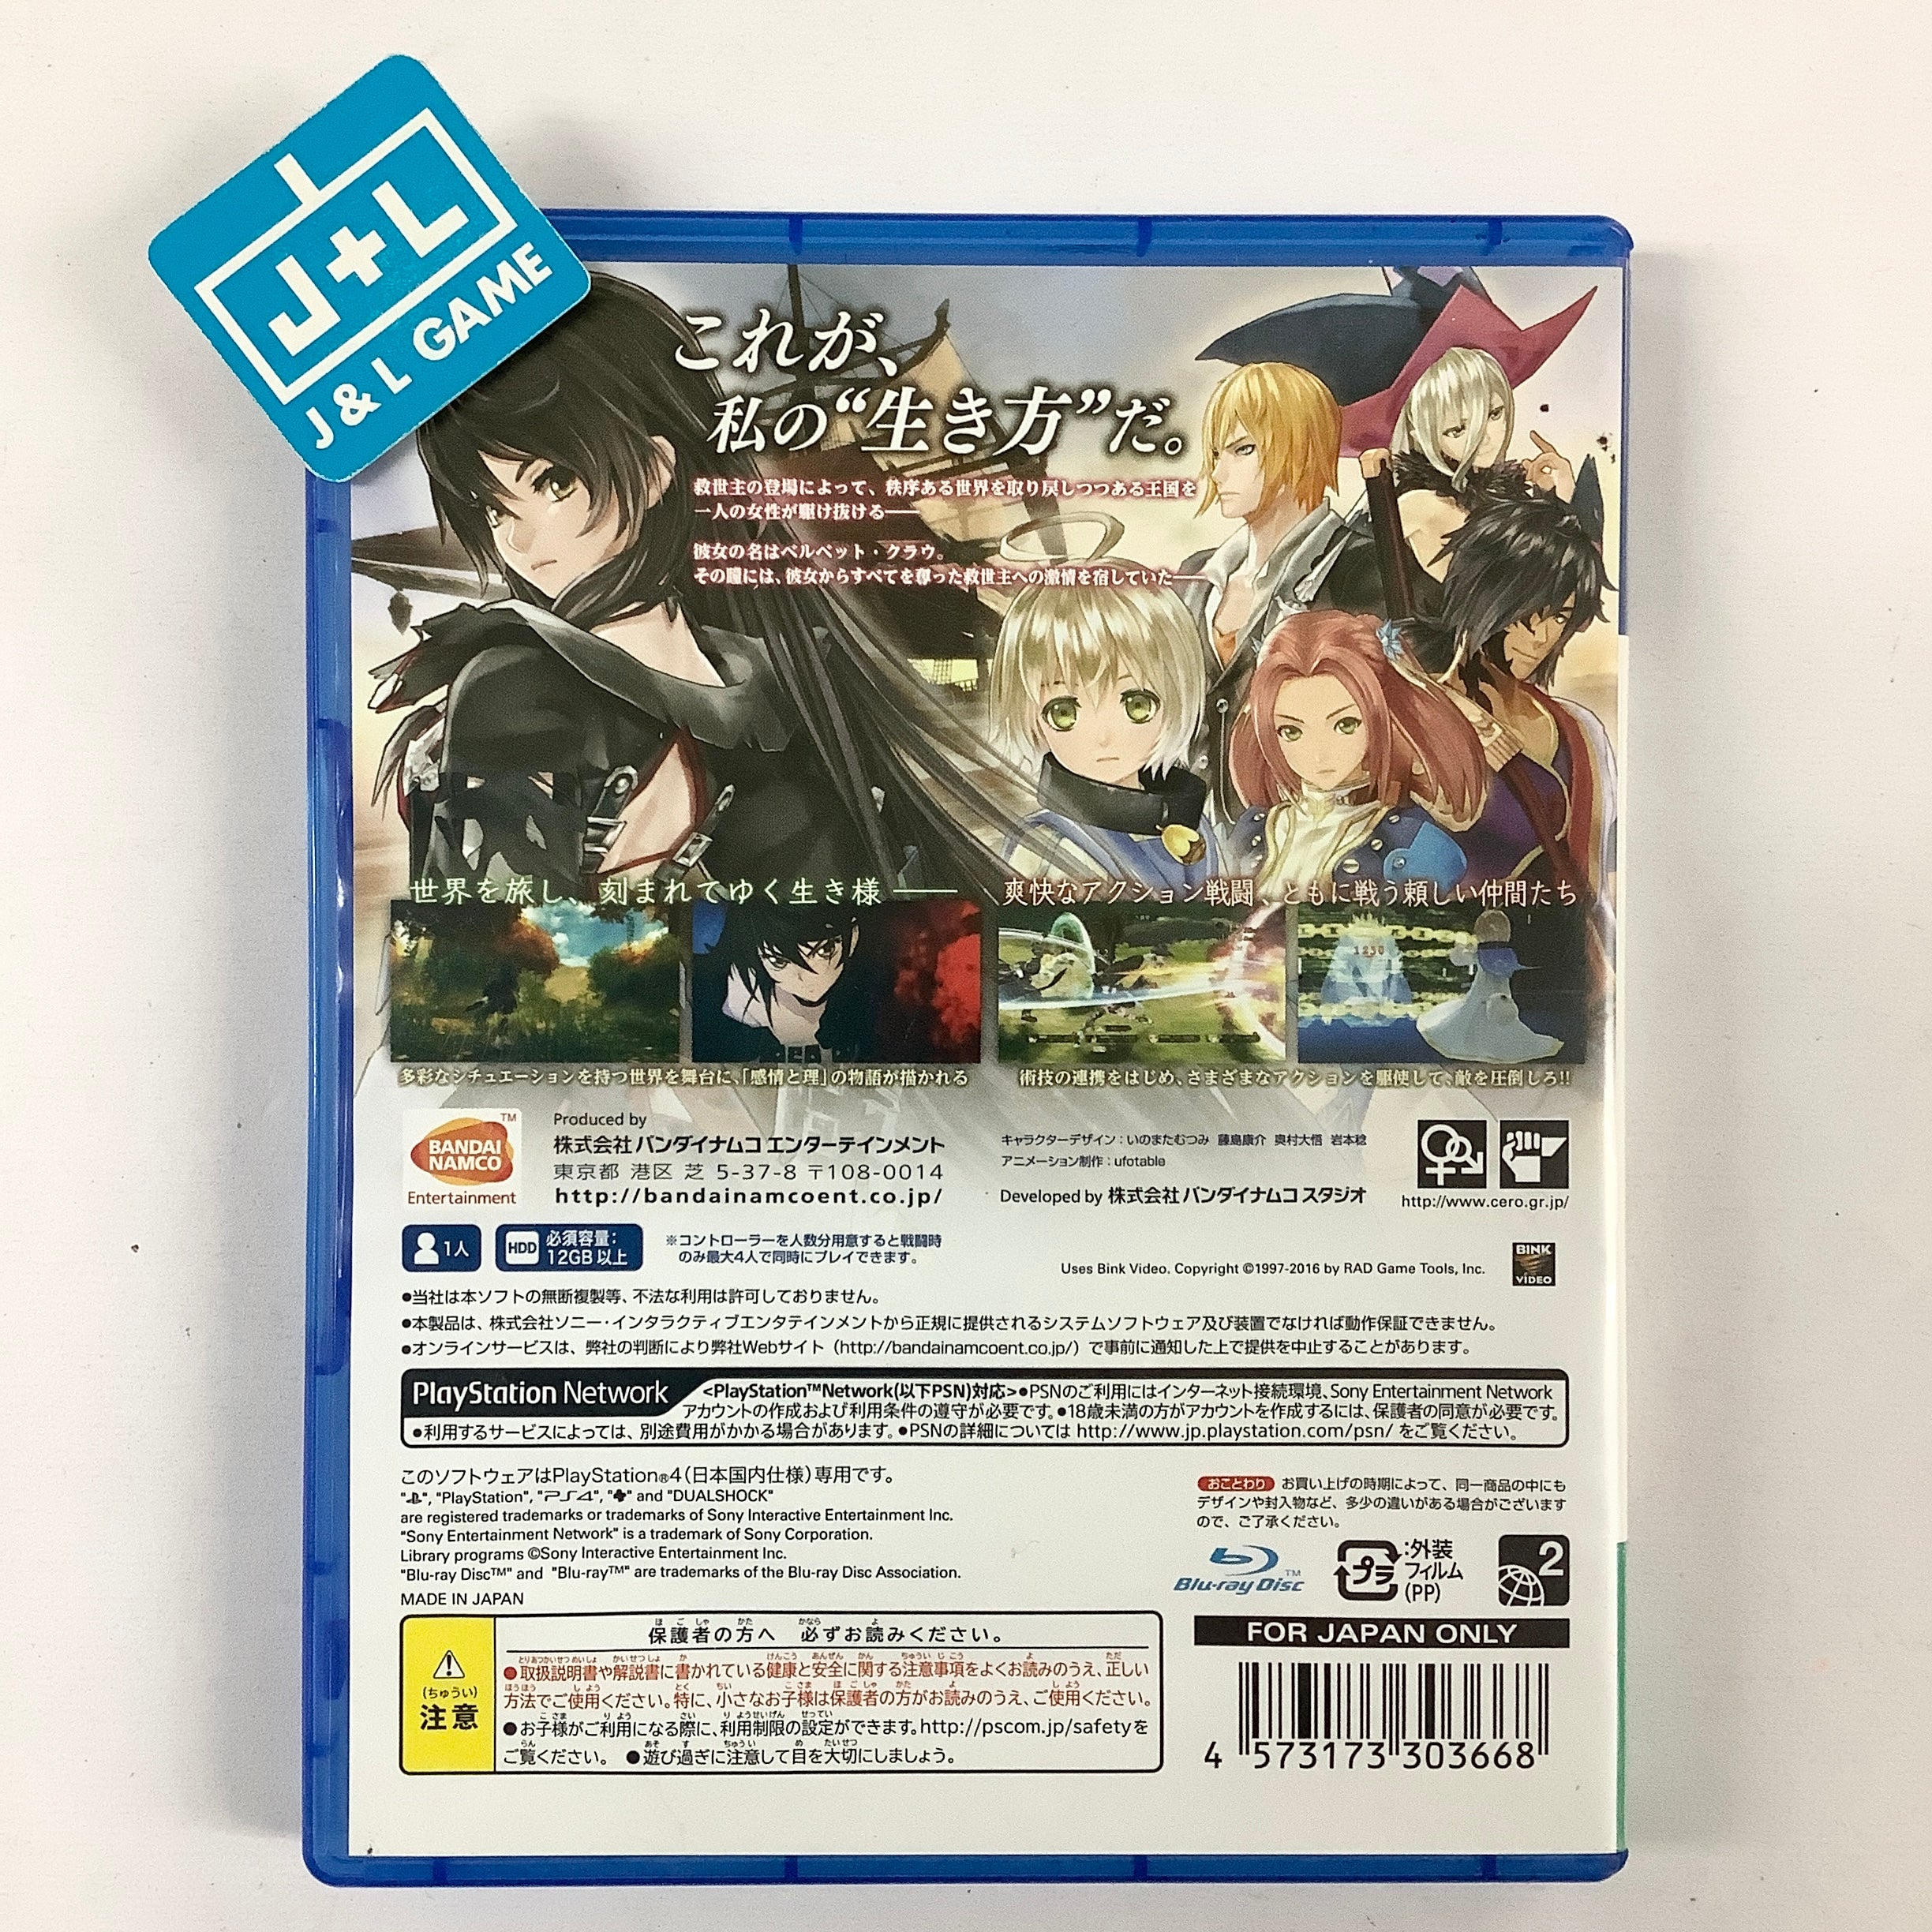 Tales of Berseria - (PS4) PlayStation 4 [Pre-Owned] (Japanese Import) Video Games Bandai Namco Games   